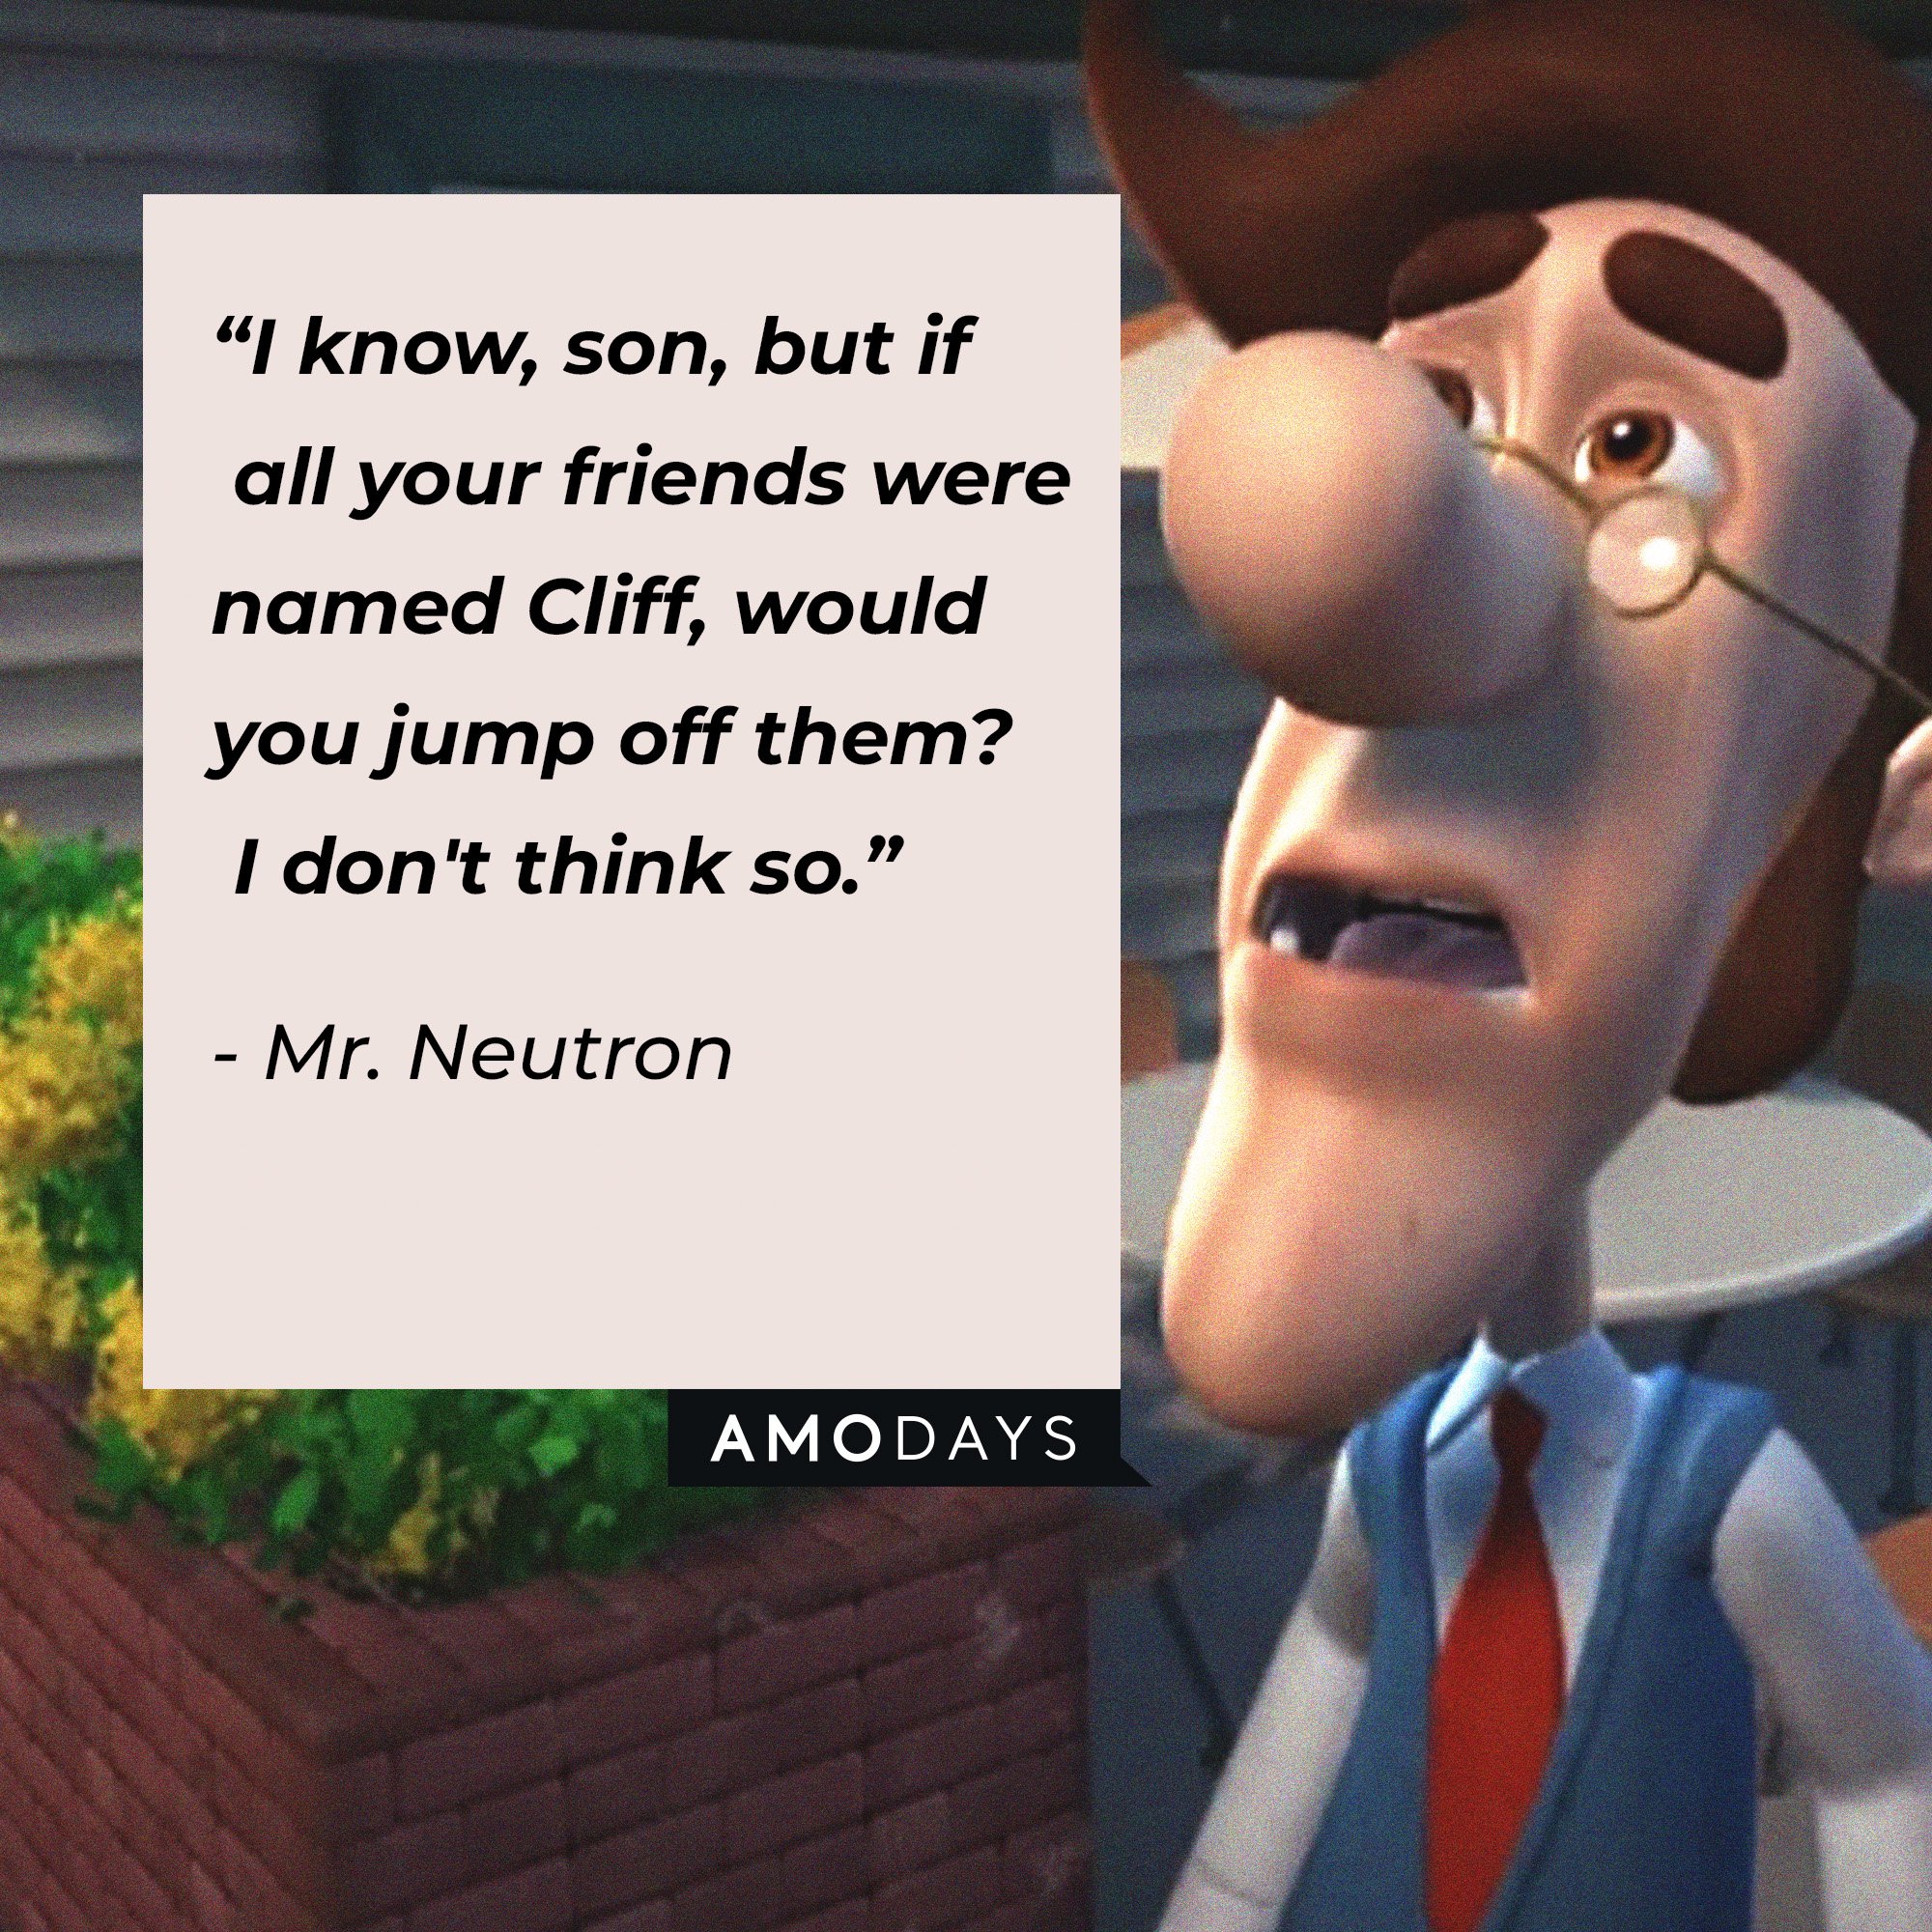 48 ‘Jimmy Neutron: Boy Genius’ Quotes to Spin You Out of This World